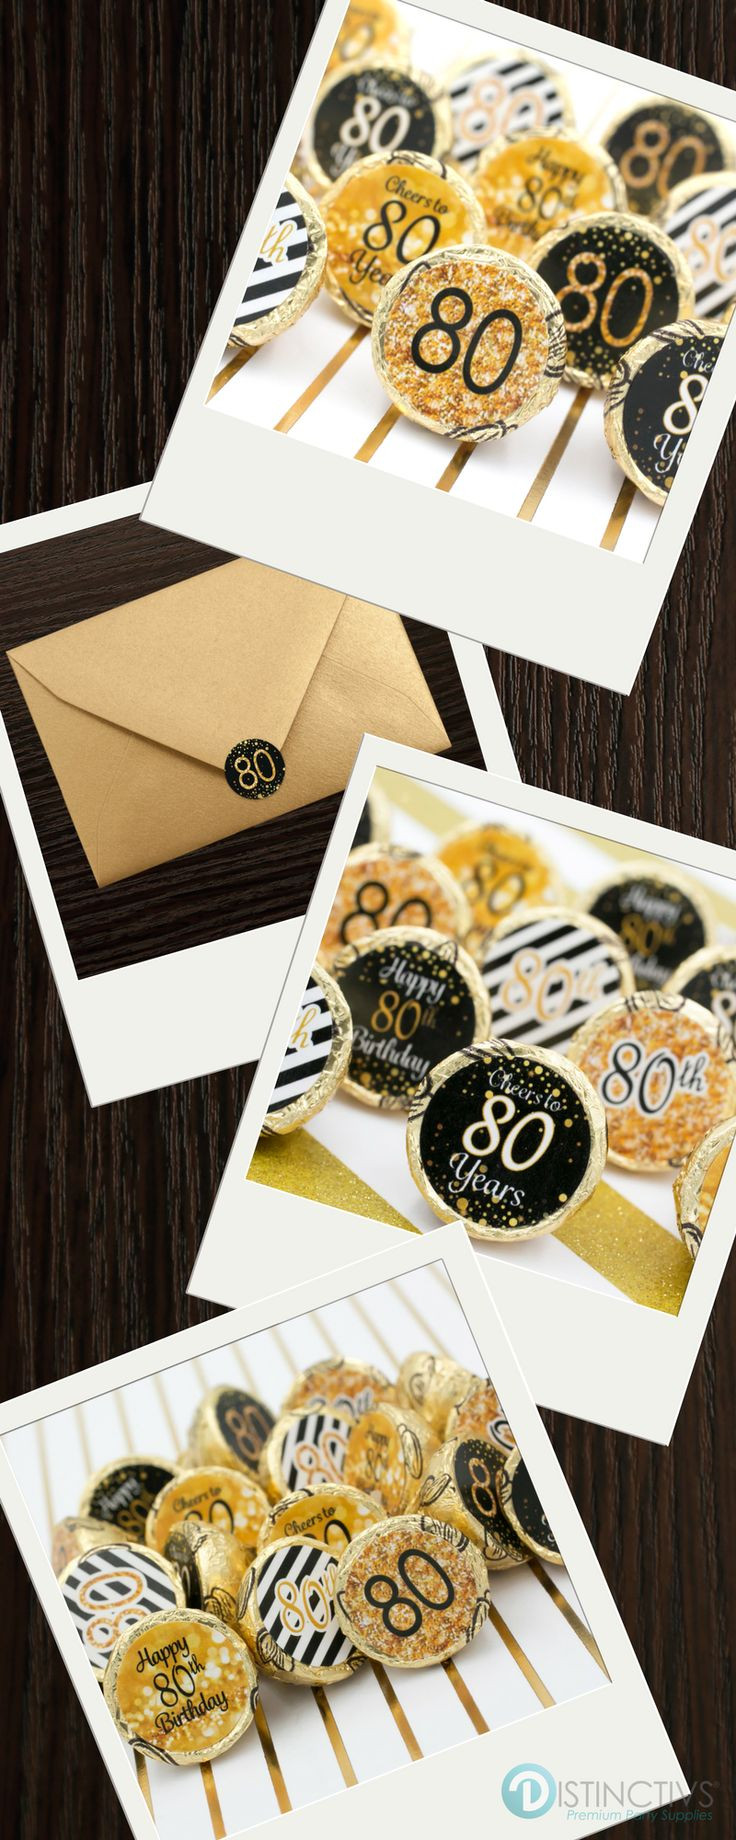 80th Birthday Decoration Ideas
 38 best images about 80th Birthday Party Ideas on Pinterest